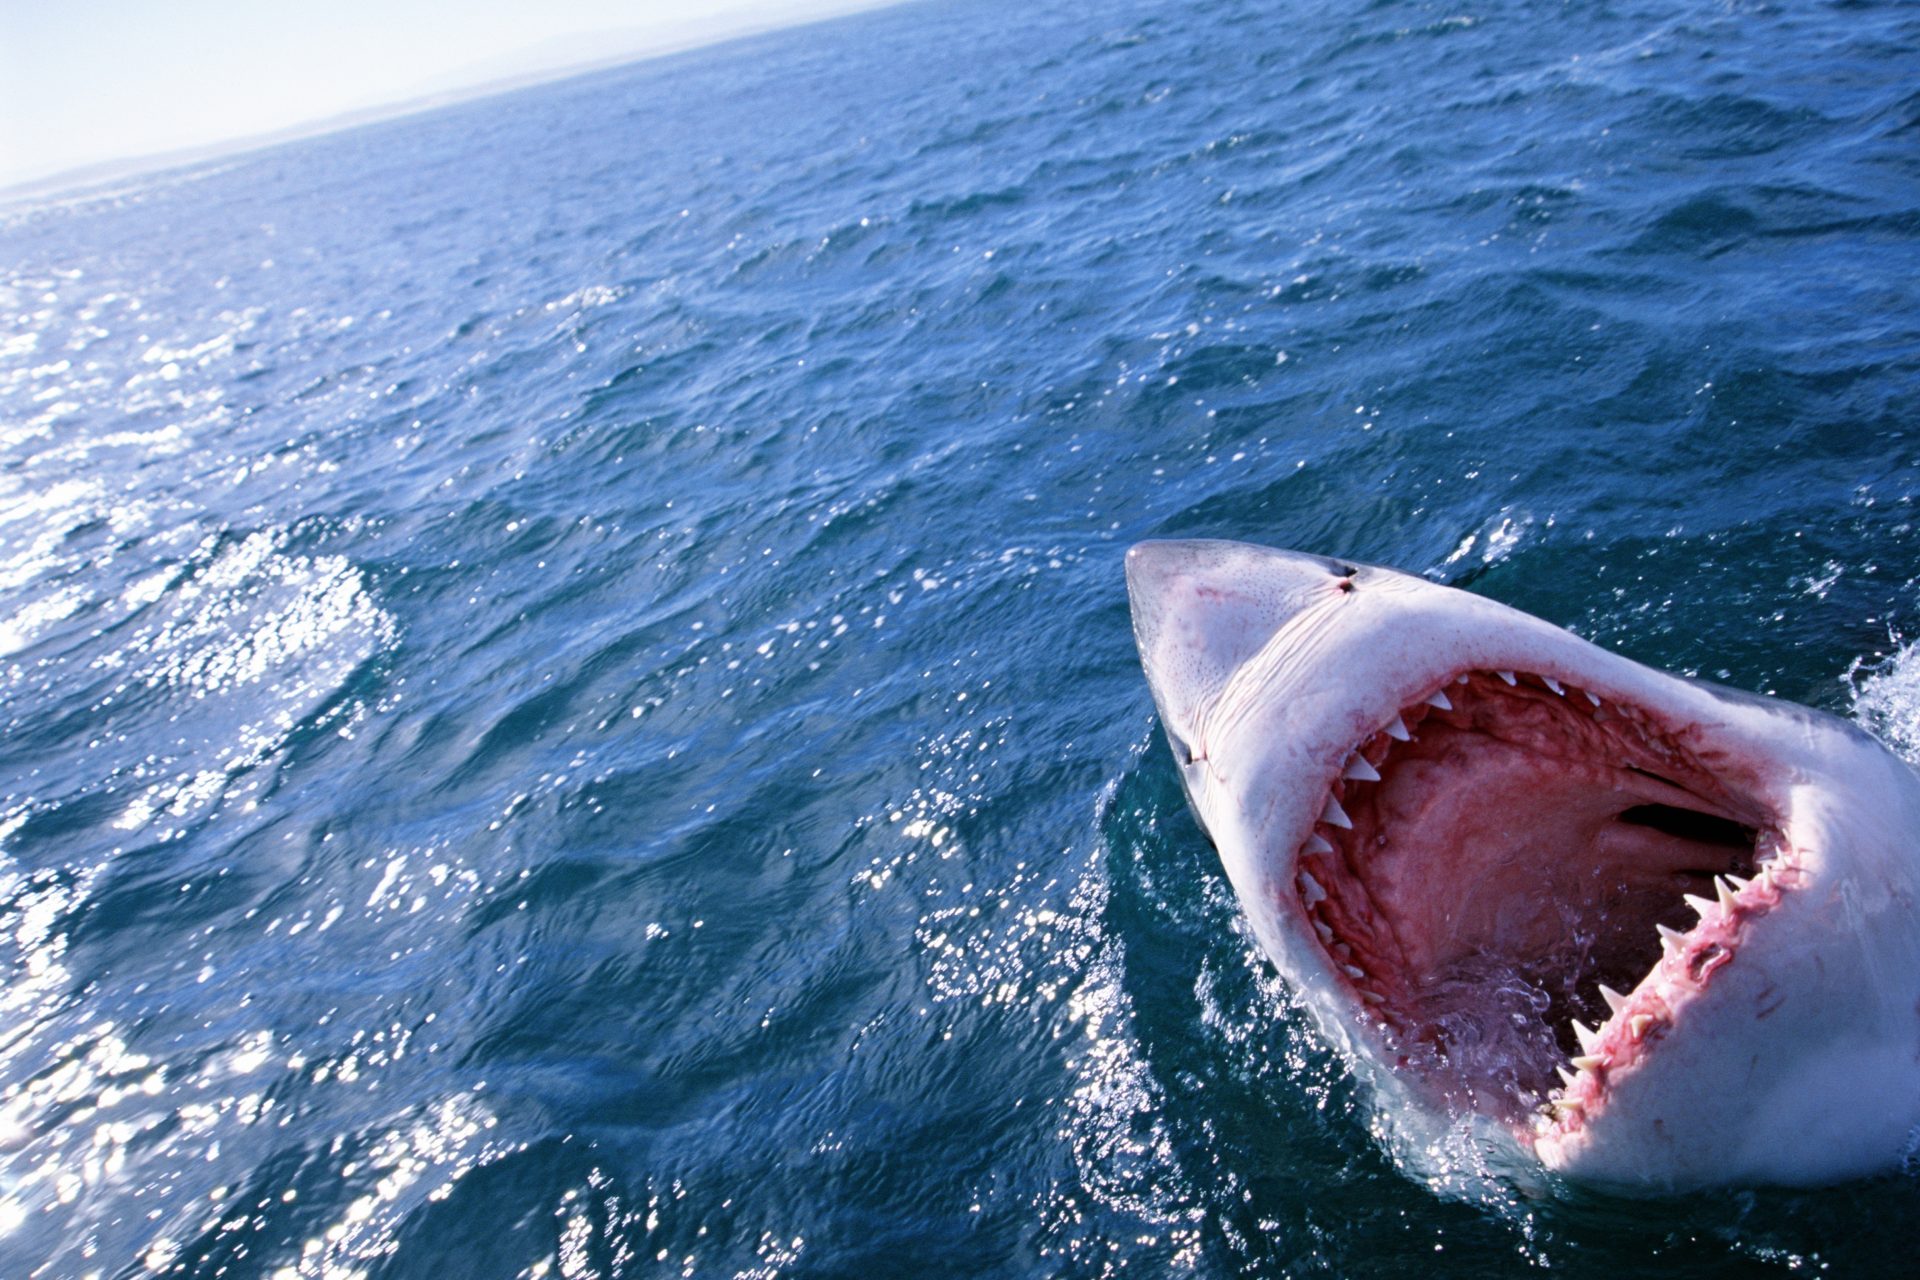 Shark attacks on the rise